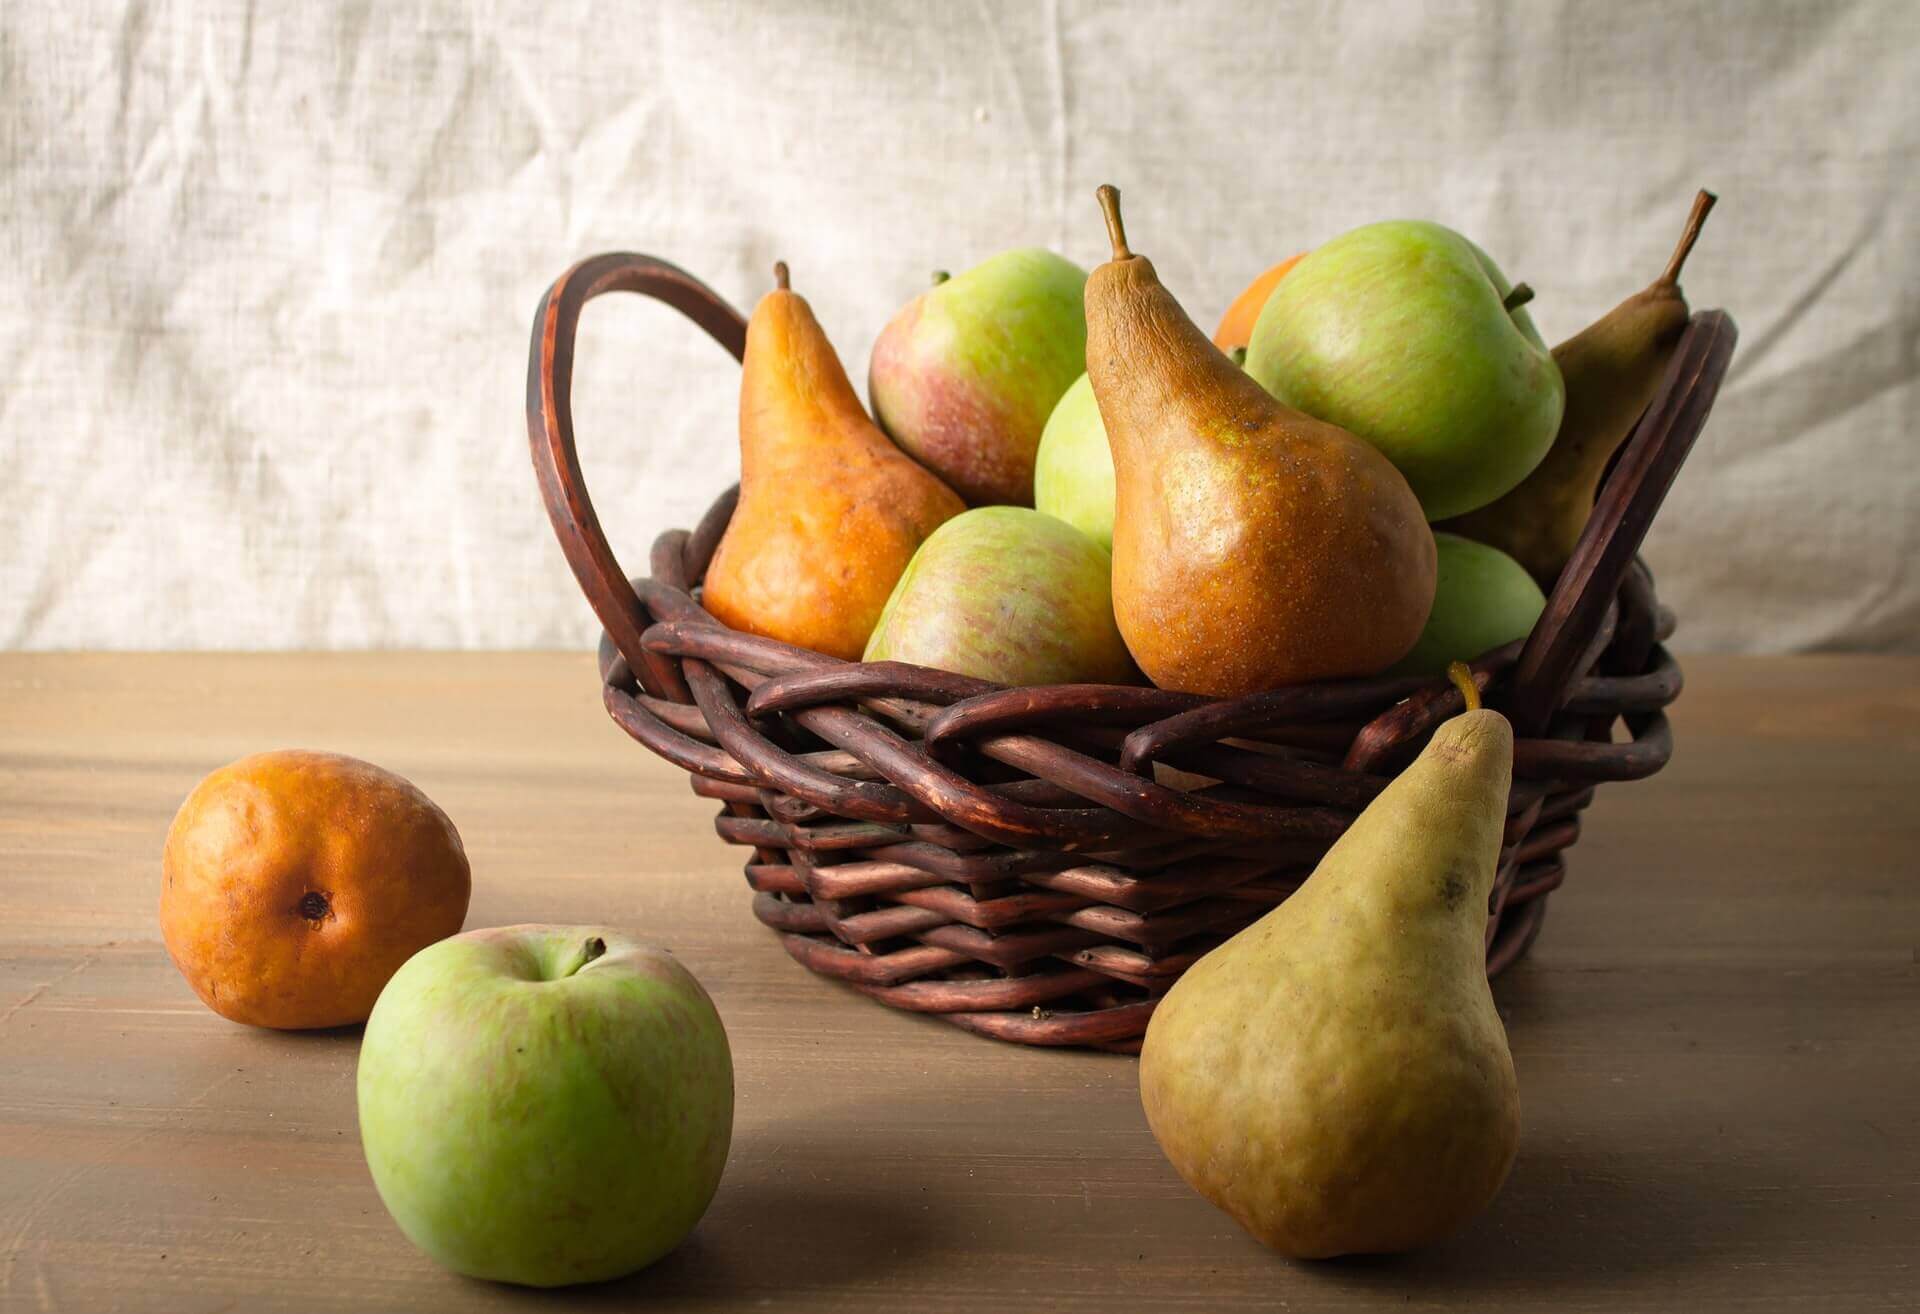 A basket of pears.